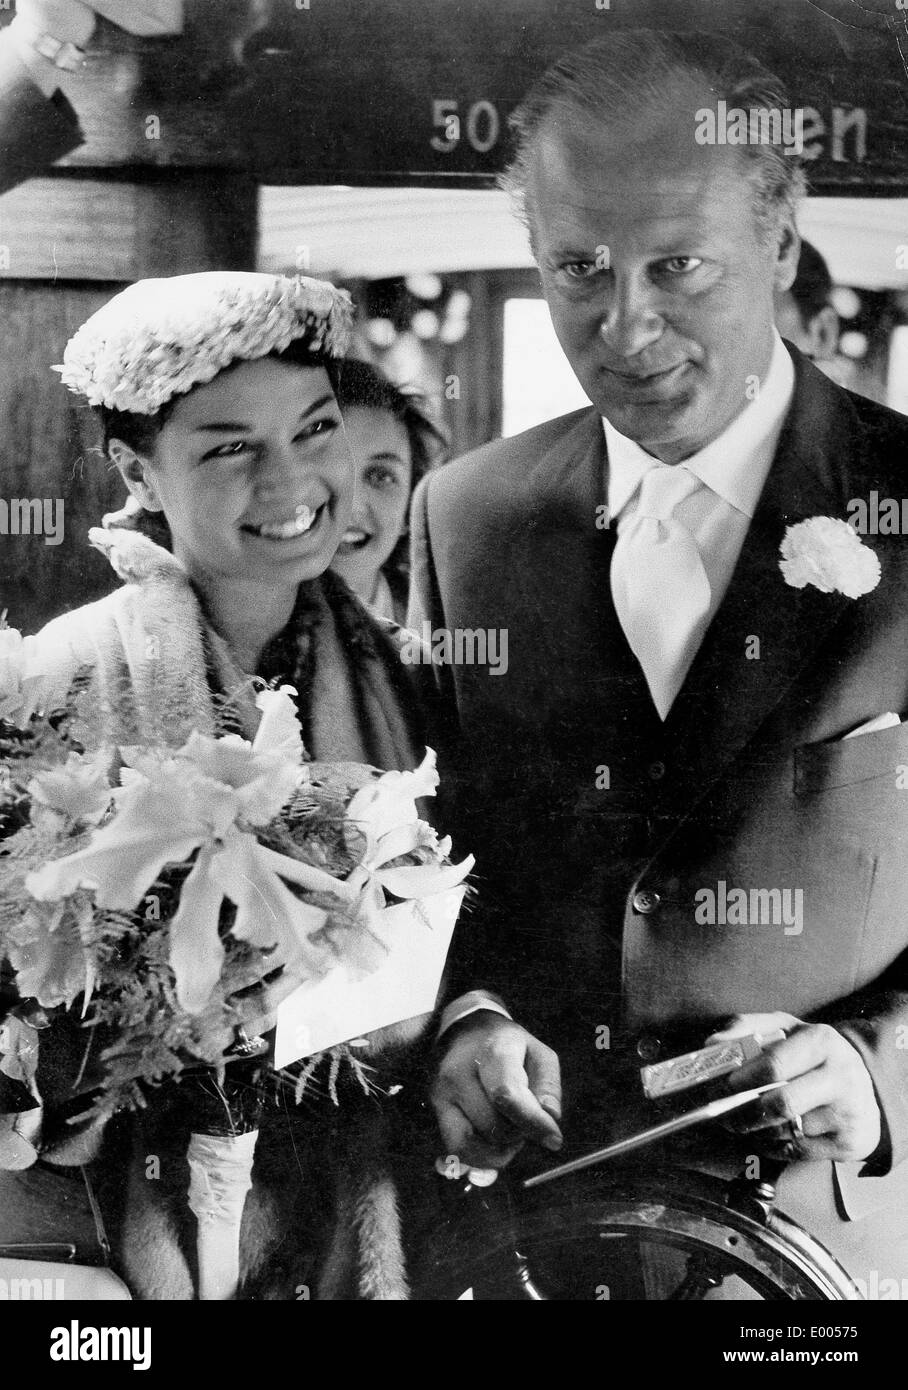 The wedding of Curd Juergens and Eva Bartok in Schliersee, 1955 Stock Photo